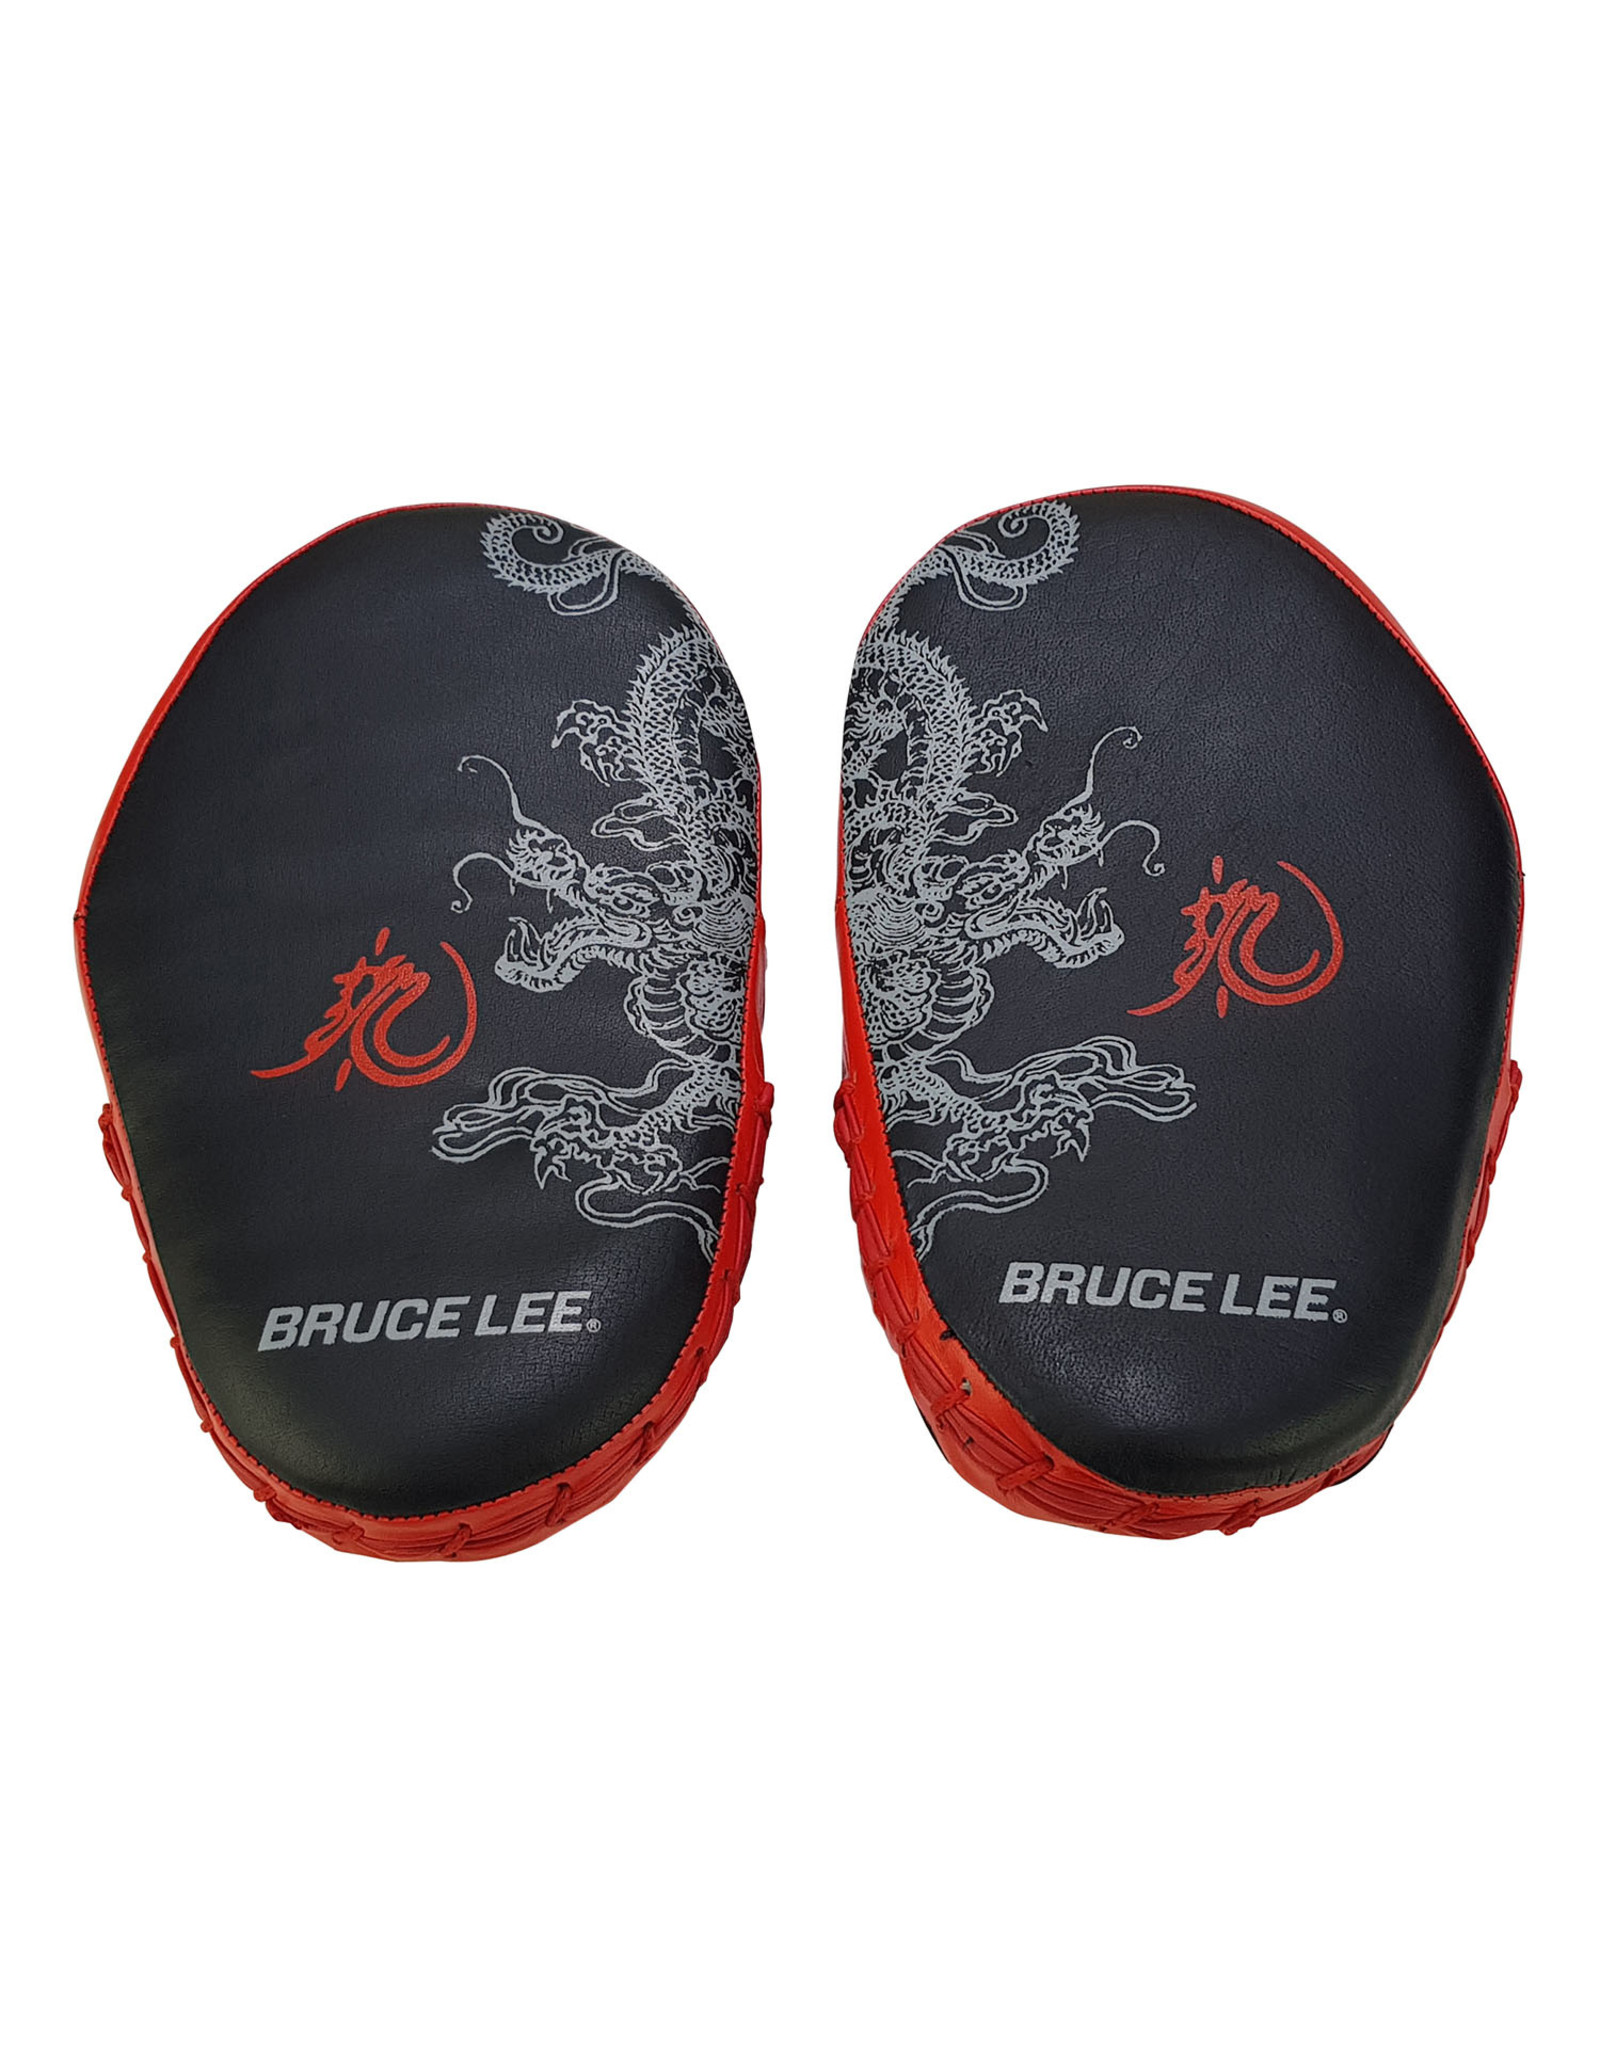 Bruce Lee Bruce Lee Dragon Coaching Mitts